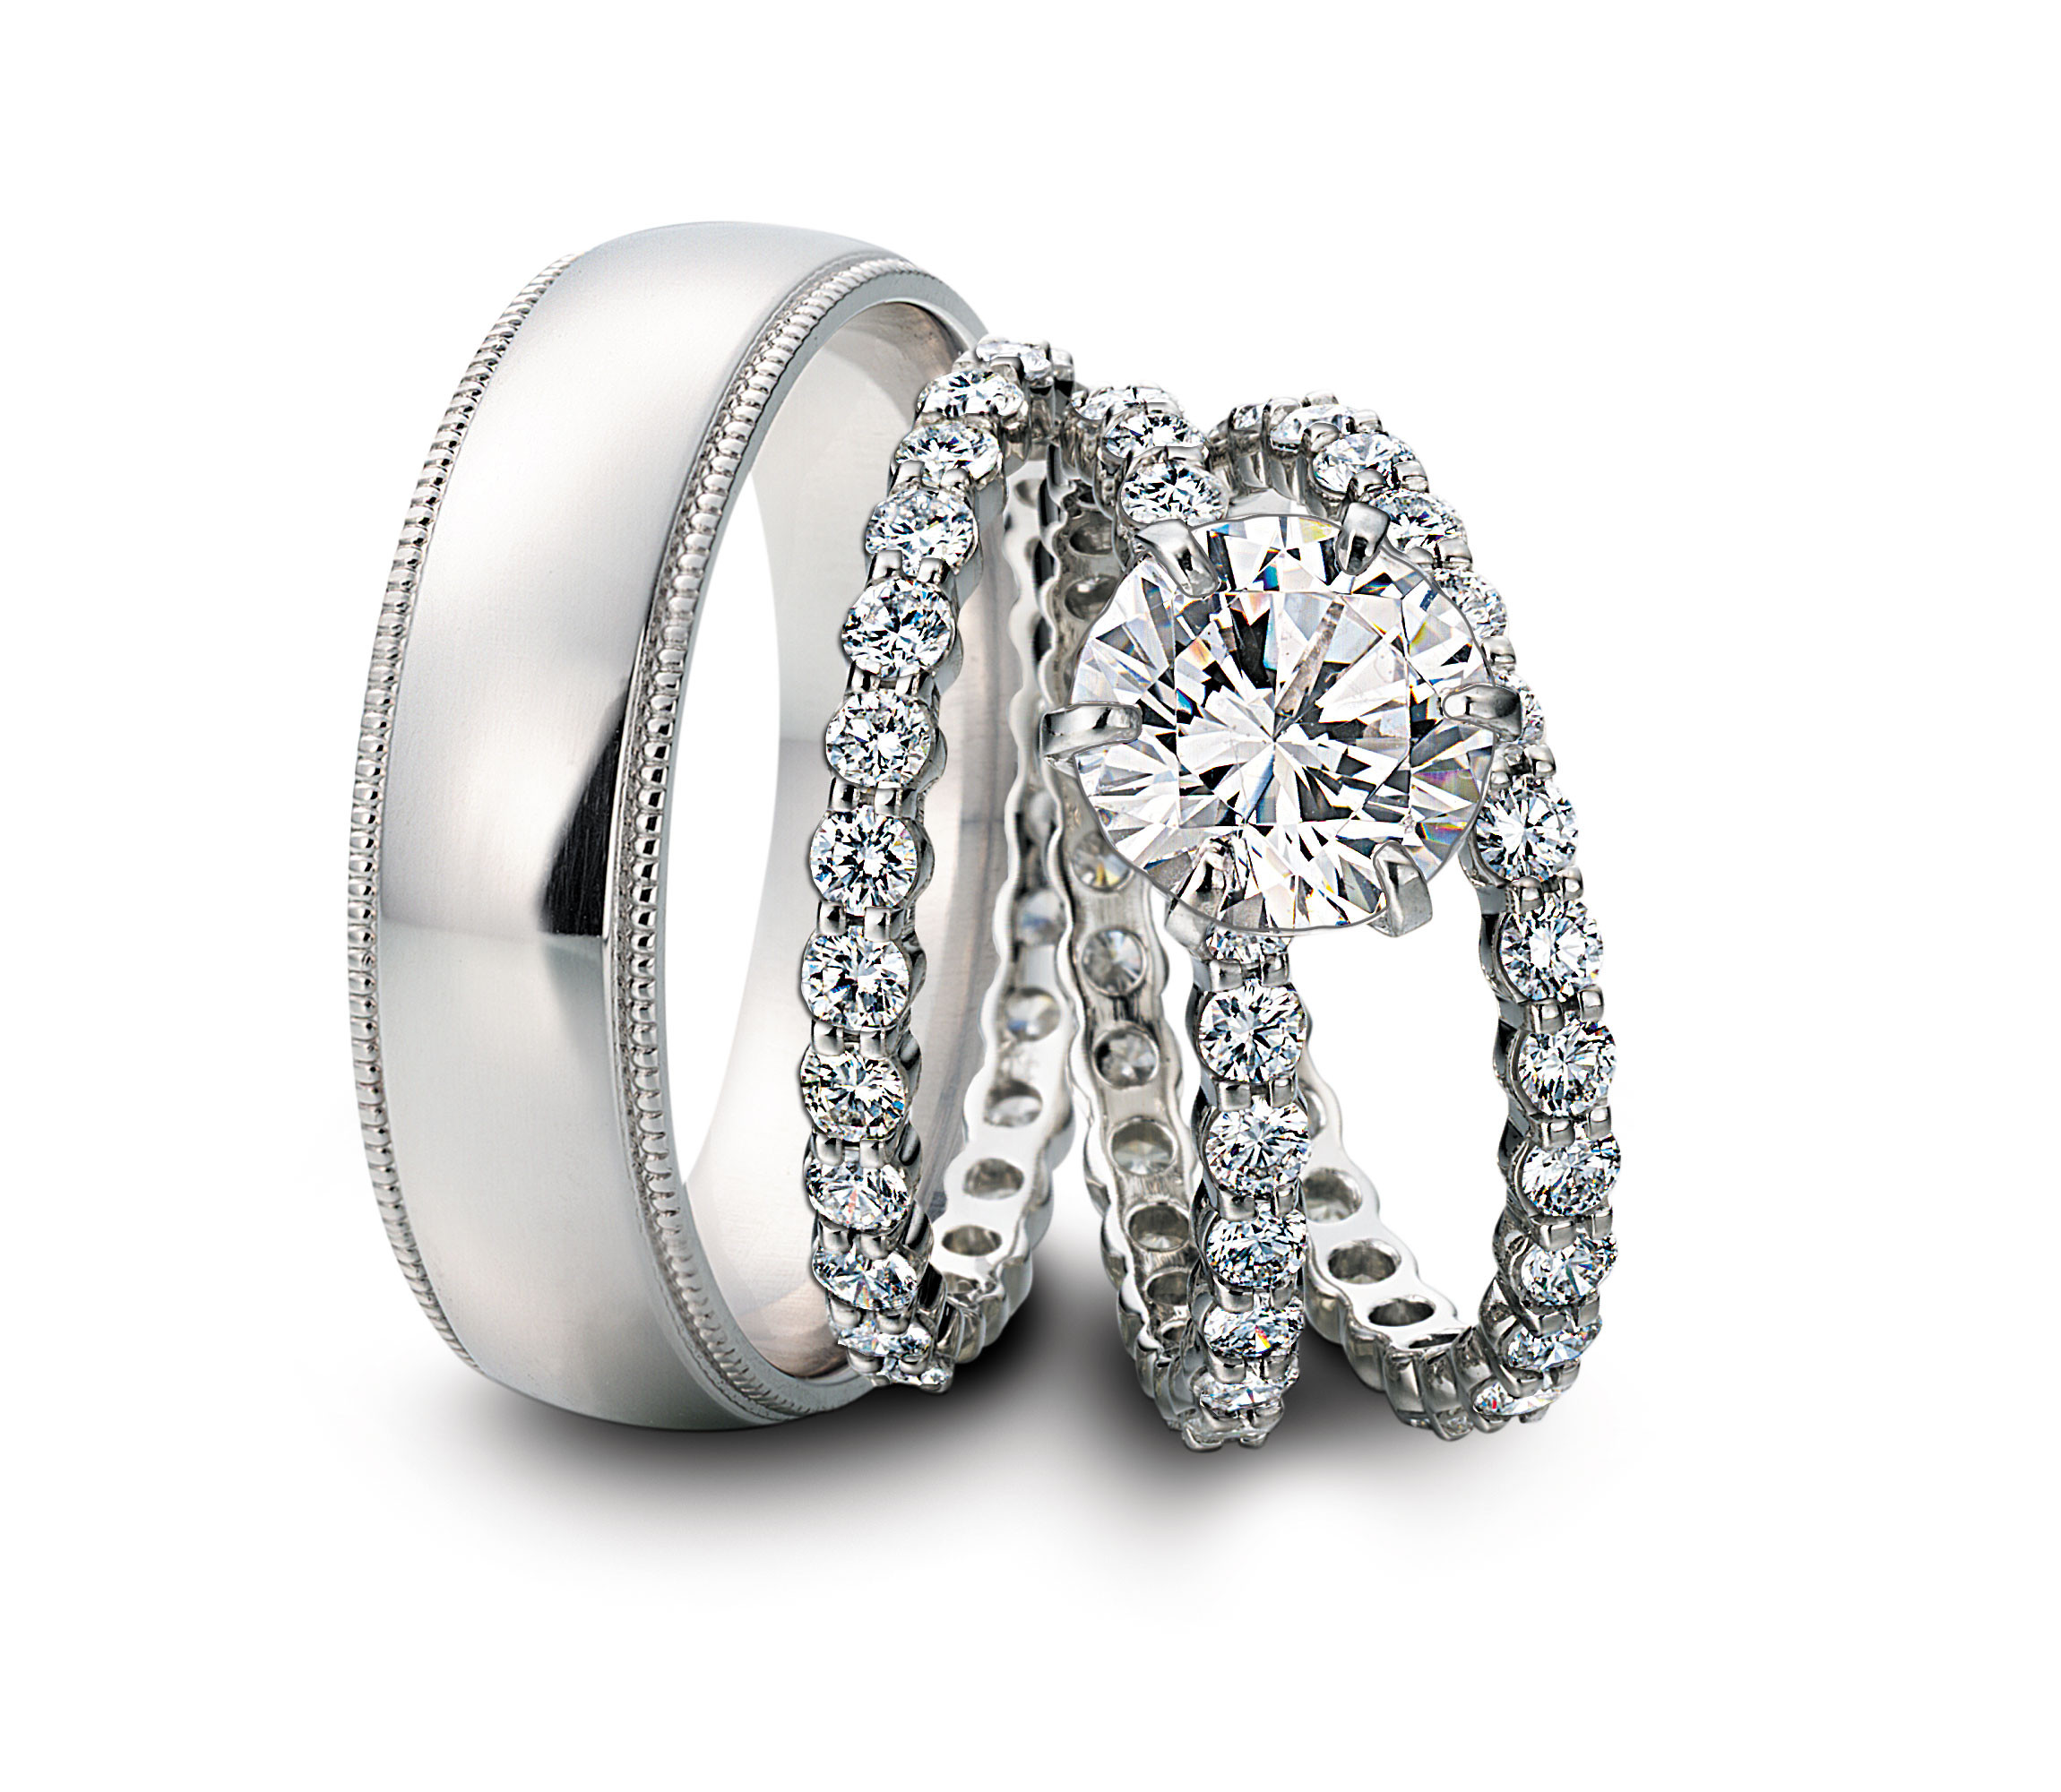 Matching Wedding Rings
 Should my wedding band be platinum or gold